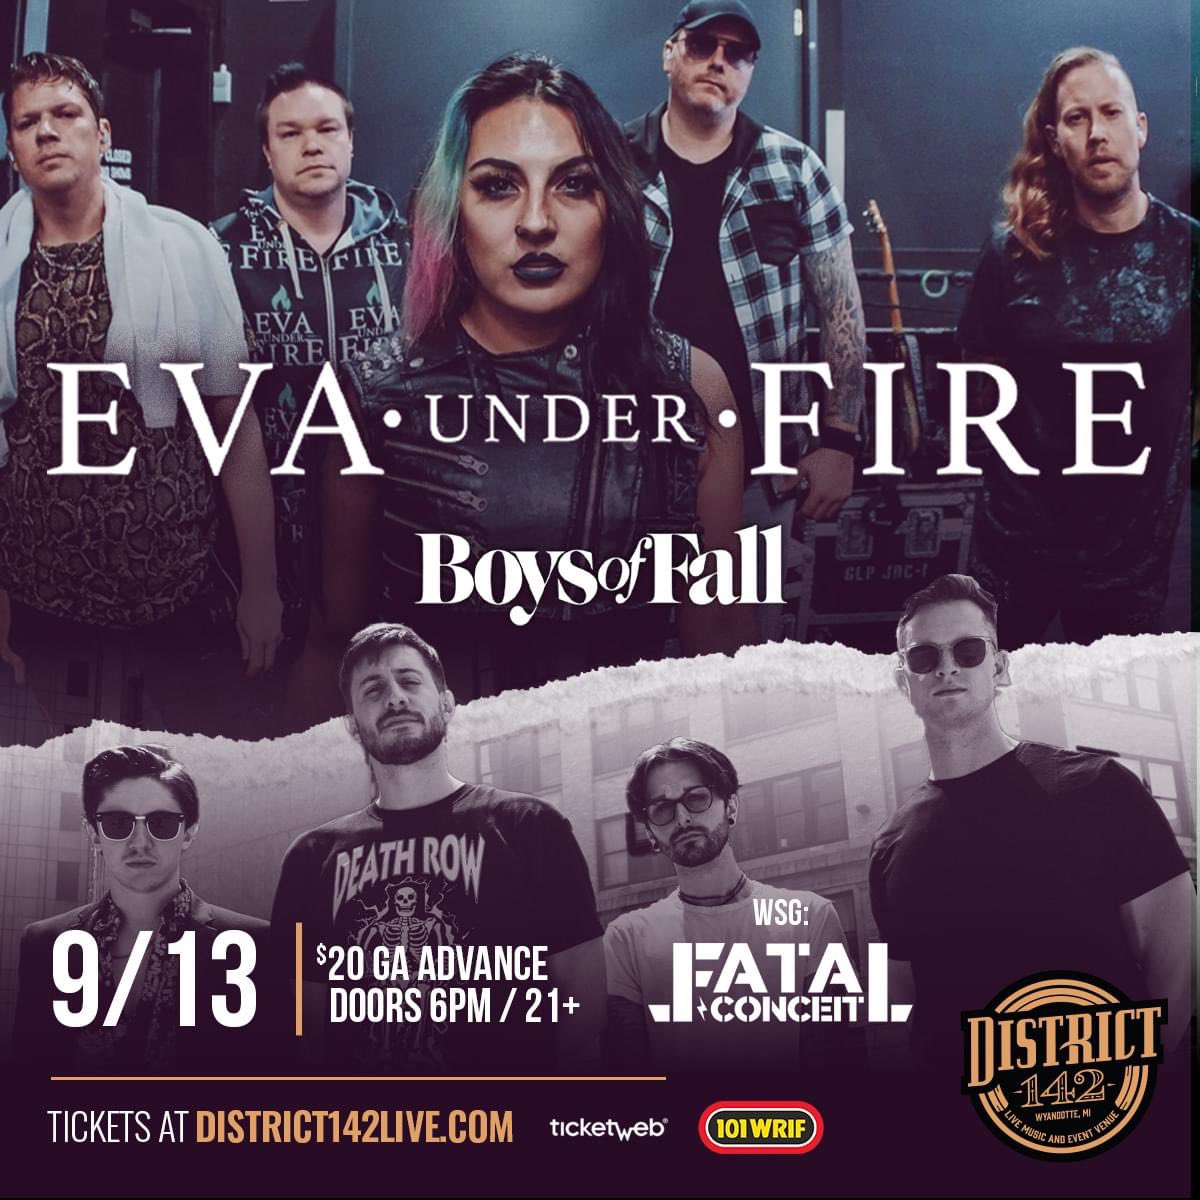 Tickets on sale NOW!!! @boysoffallband @FatalConceitUS District142live.com